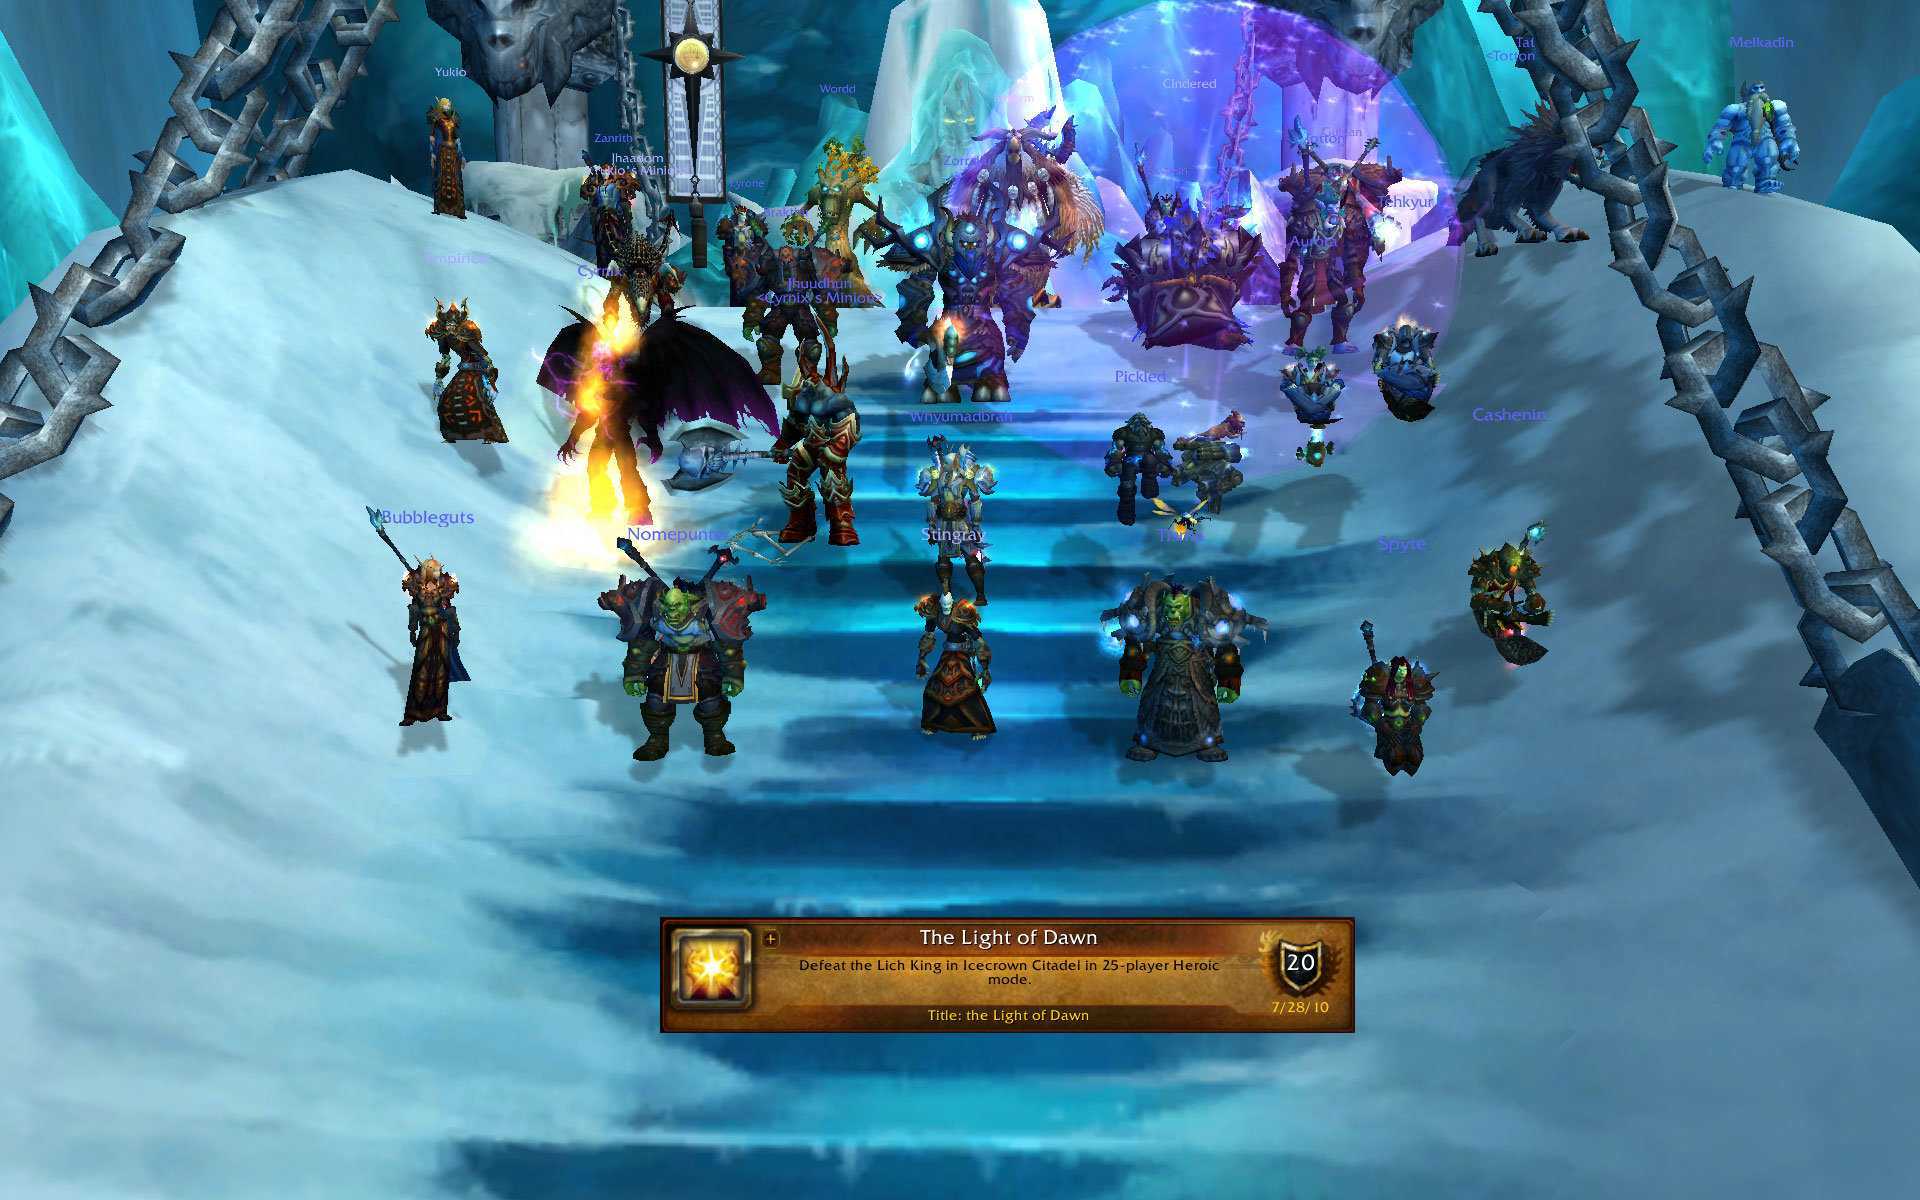 Wotlk 3.3 5. World of Warcraft Wrath of the lich King. Warcraft 3 lich King. Лич Кинг варкрафт 3. Wow lich King 3.3.5a.